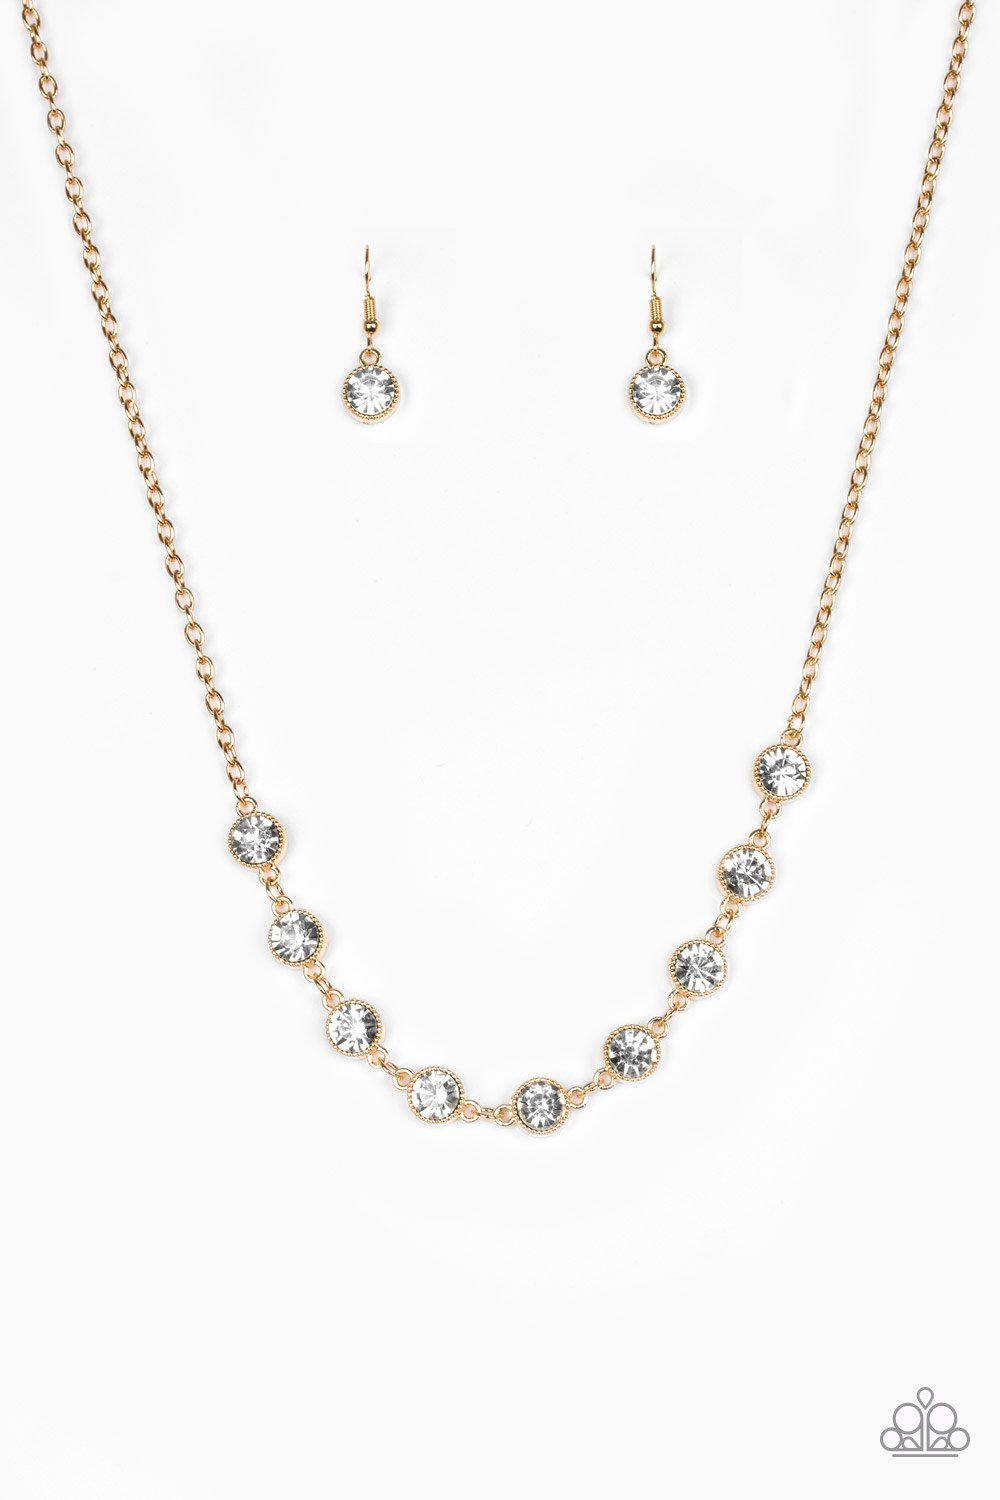 Starlit Socials Gold and White Rhinestone Necklace - Paparazzi Accessories-CarasShop.com - $5 Jewelry by Cara Jewels